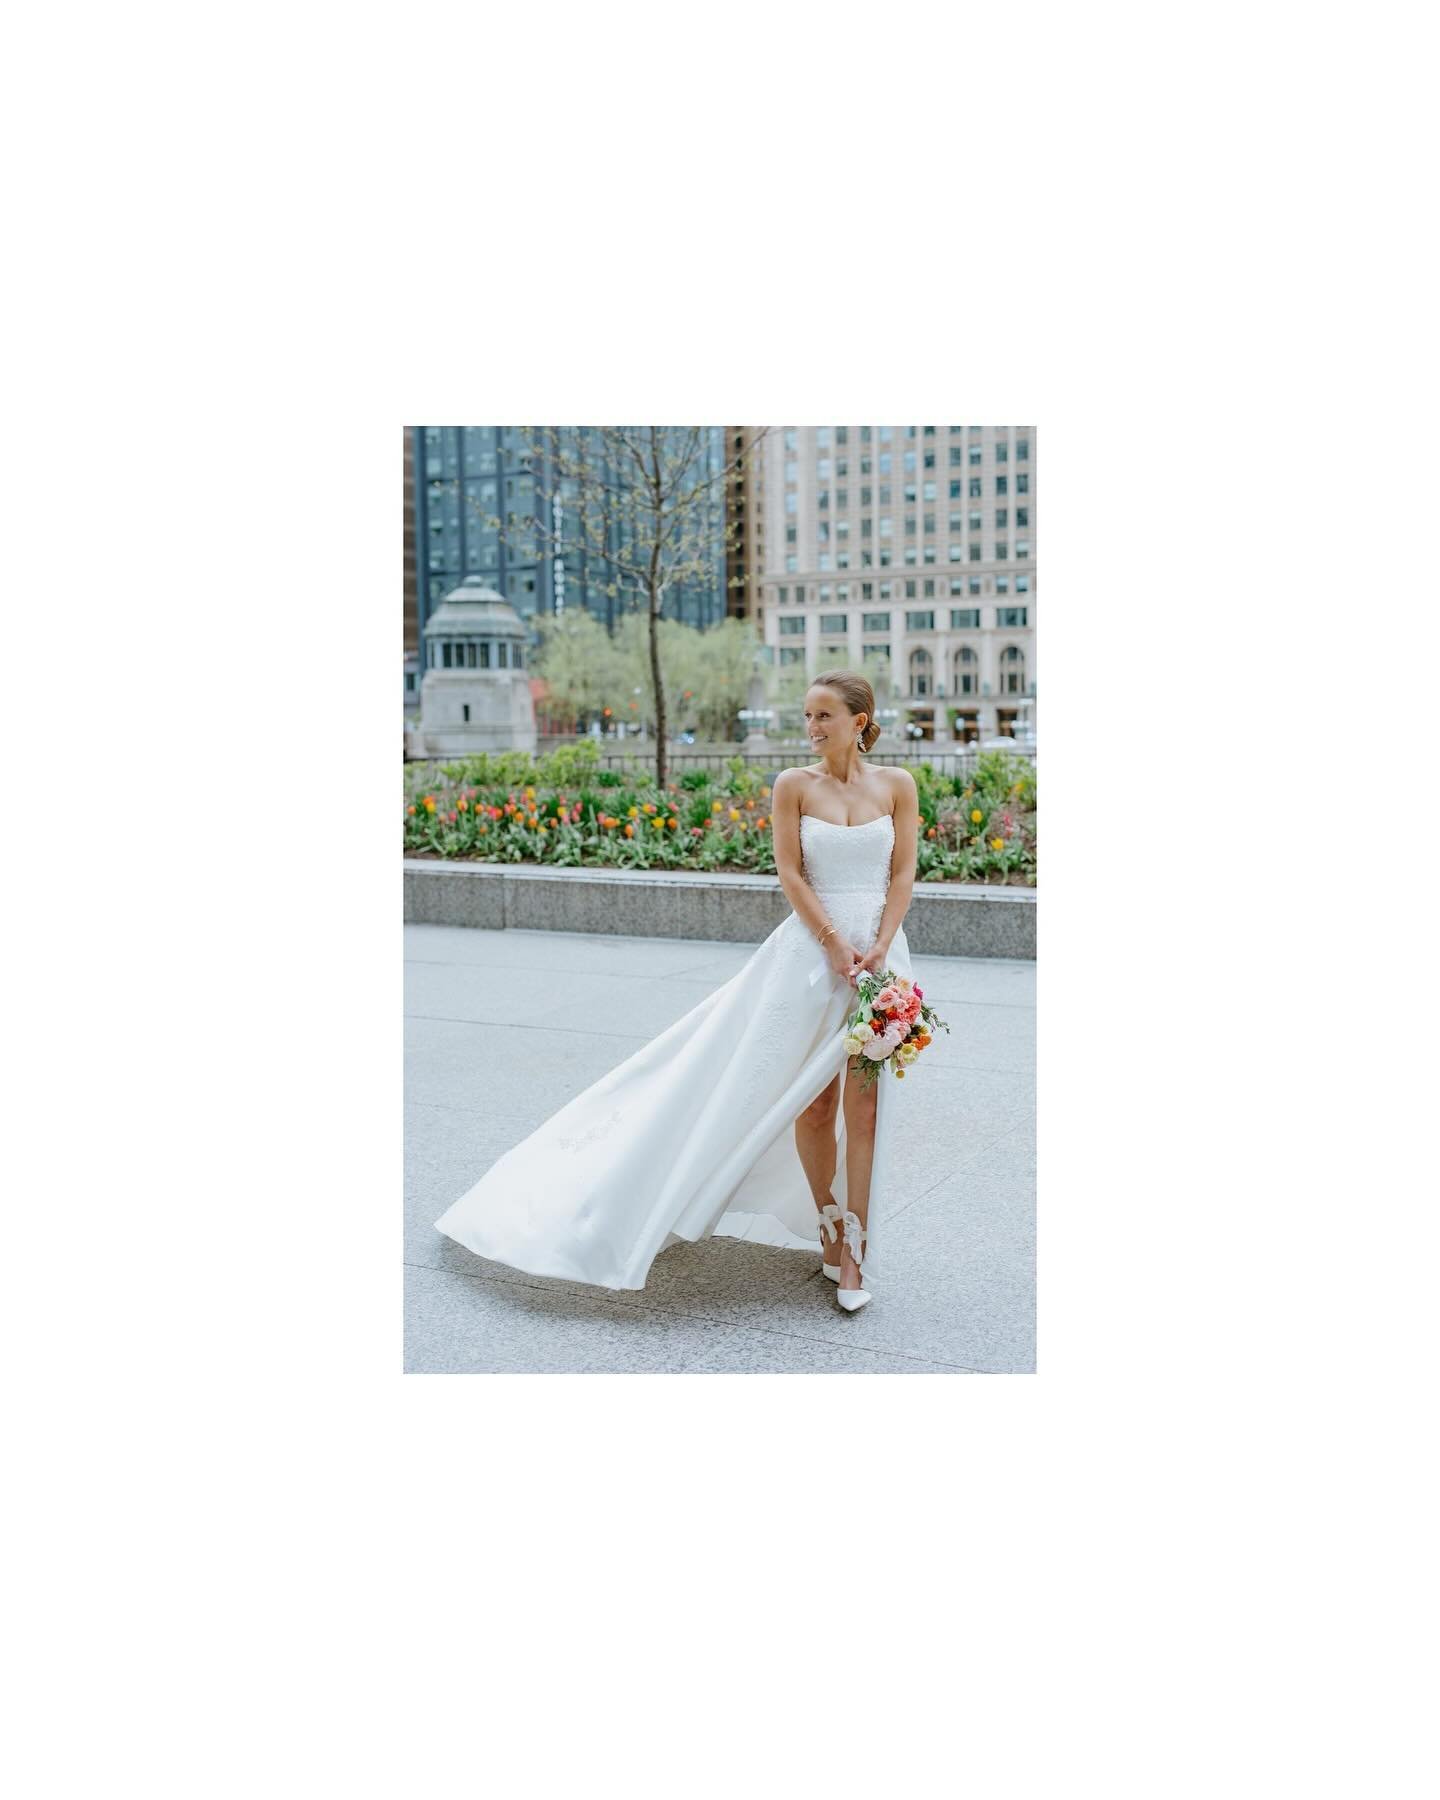 A moment for our bride ✨  a moment for spring 🌷 a moment for the gals 💖💖💖

Venue: @langhamchicago 
Planner &amp; Florals: @debililly 
Makeup: @bridalbyaga 
Hair: @hairbyjuanjose 
Styling: @arianaandersonstylist 
Dessert: @eatpistorescakes
Music: 